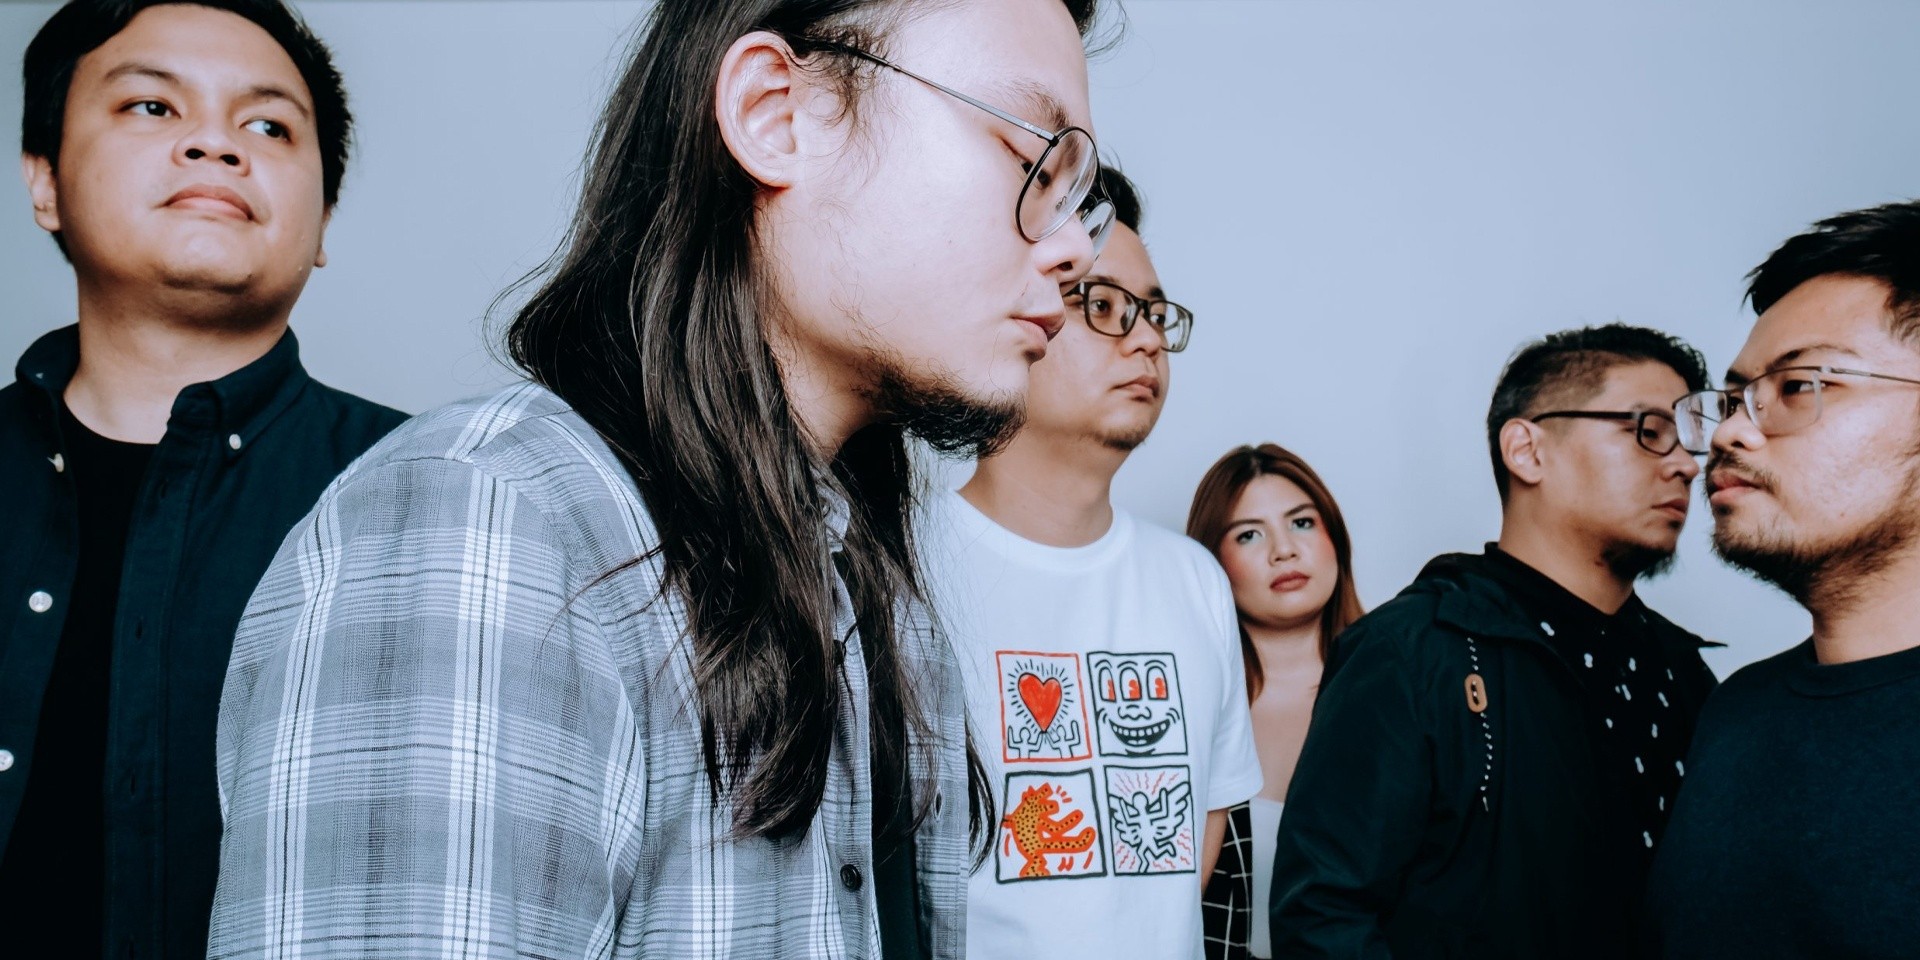 Autotelic deal with regret in new single 'Iwan' – listen